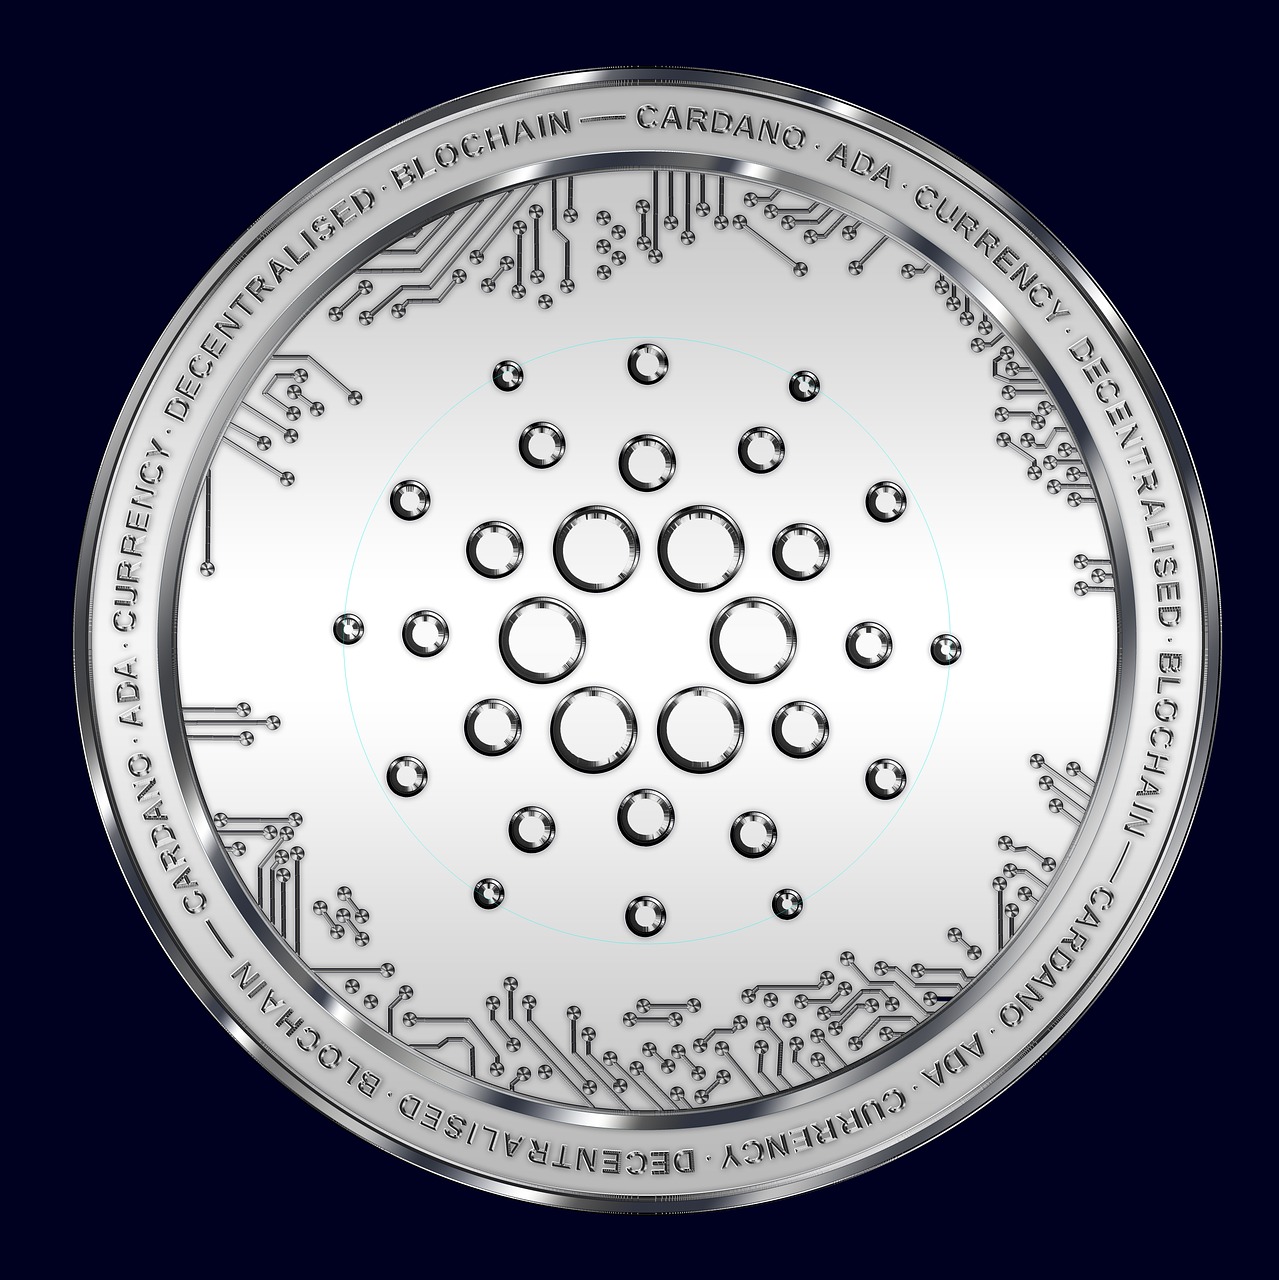 Growth In Cardano Whales Transactions, Possible Impact On ADA